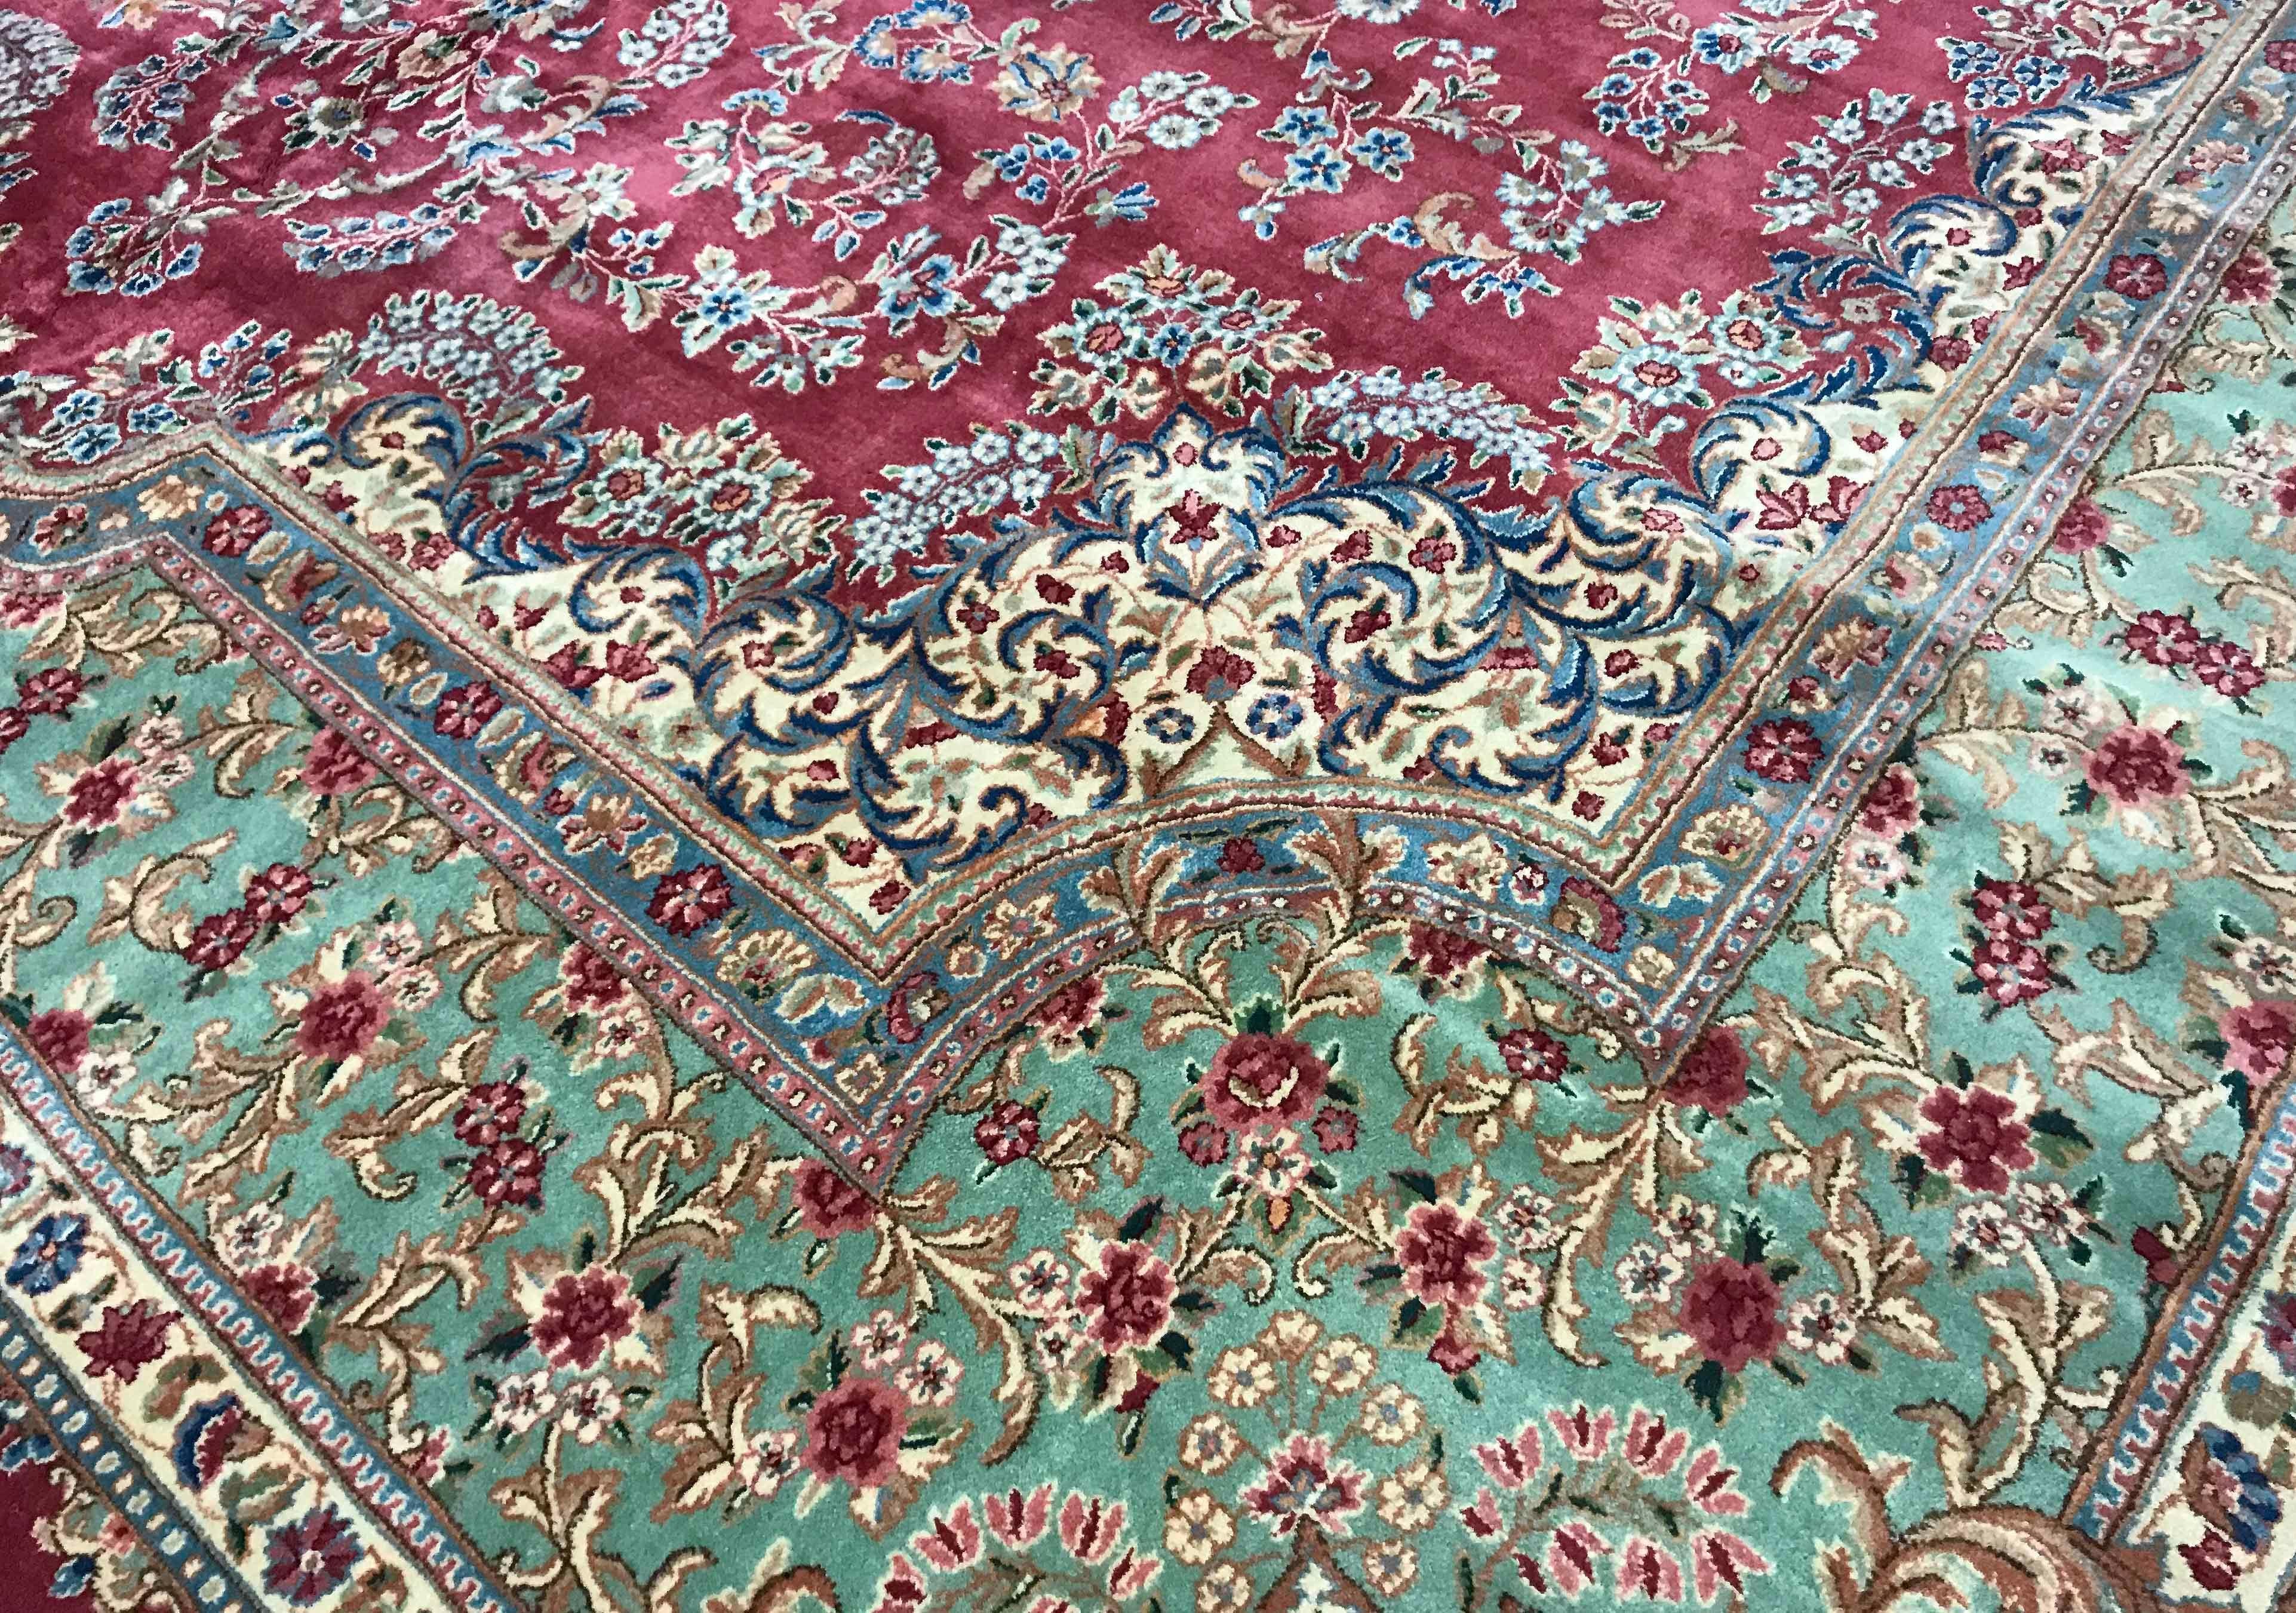 Vintage Persian Kerman, circa 1940. A delightful Kerman rug woven with exquisite detail, the red ground filled with weaving floral designs surrounding a central ivory and soft blue medallion bounded by a soft green main border and ivory and blue